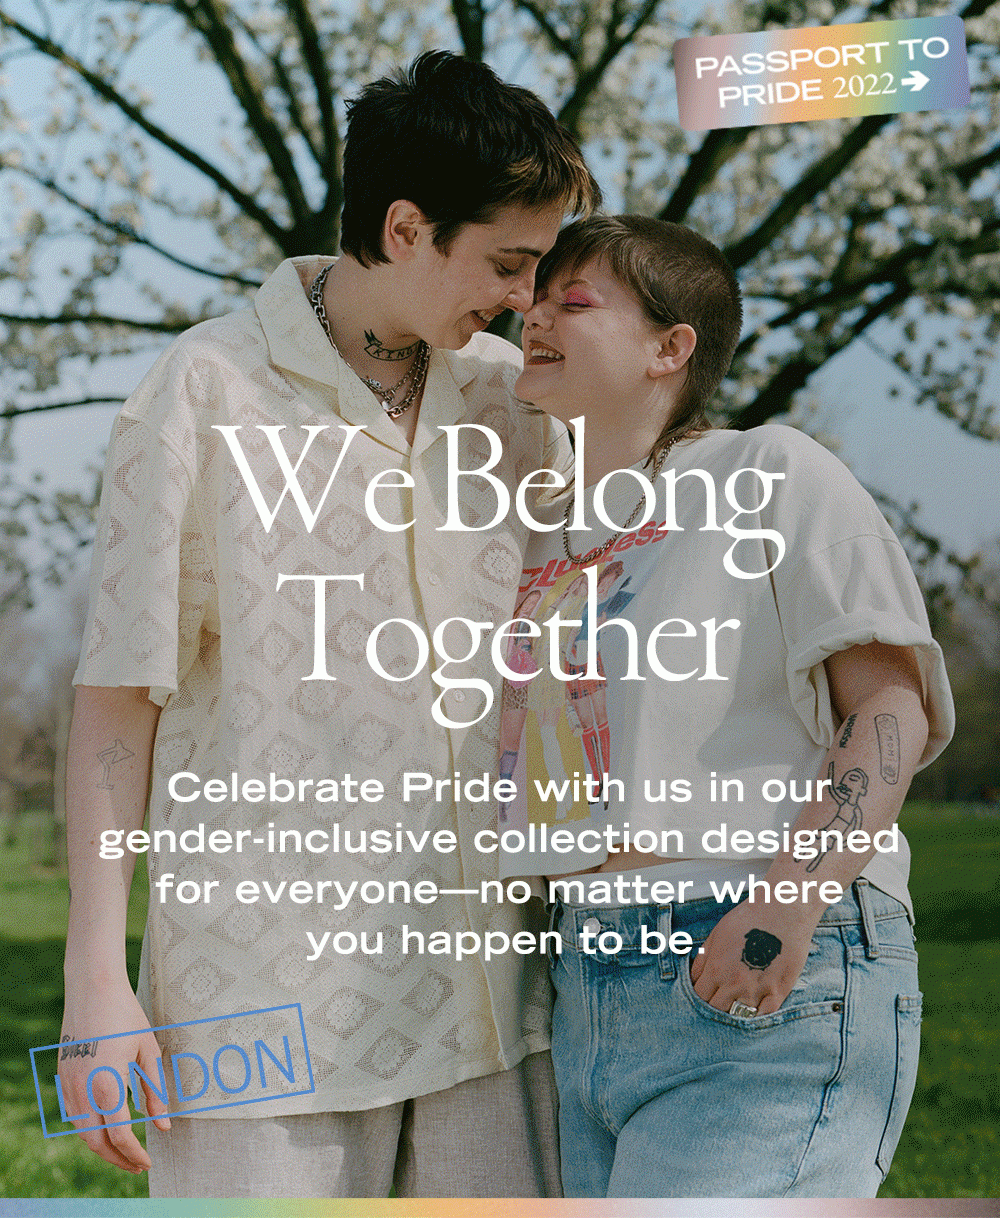 We Belong Together Celebrate Pride with us in our gender-inclusive collection designed for everyone—no matter where you happen to be.